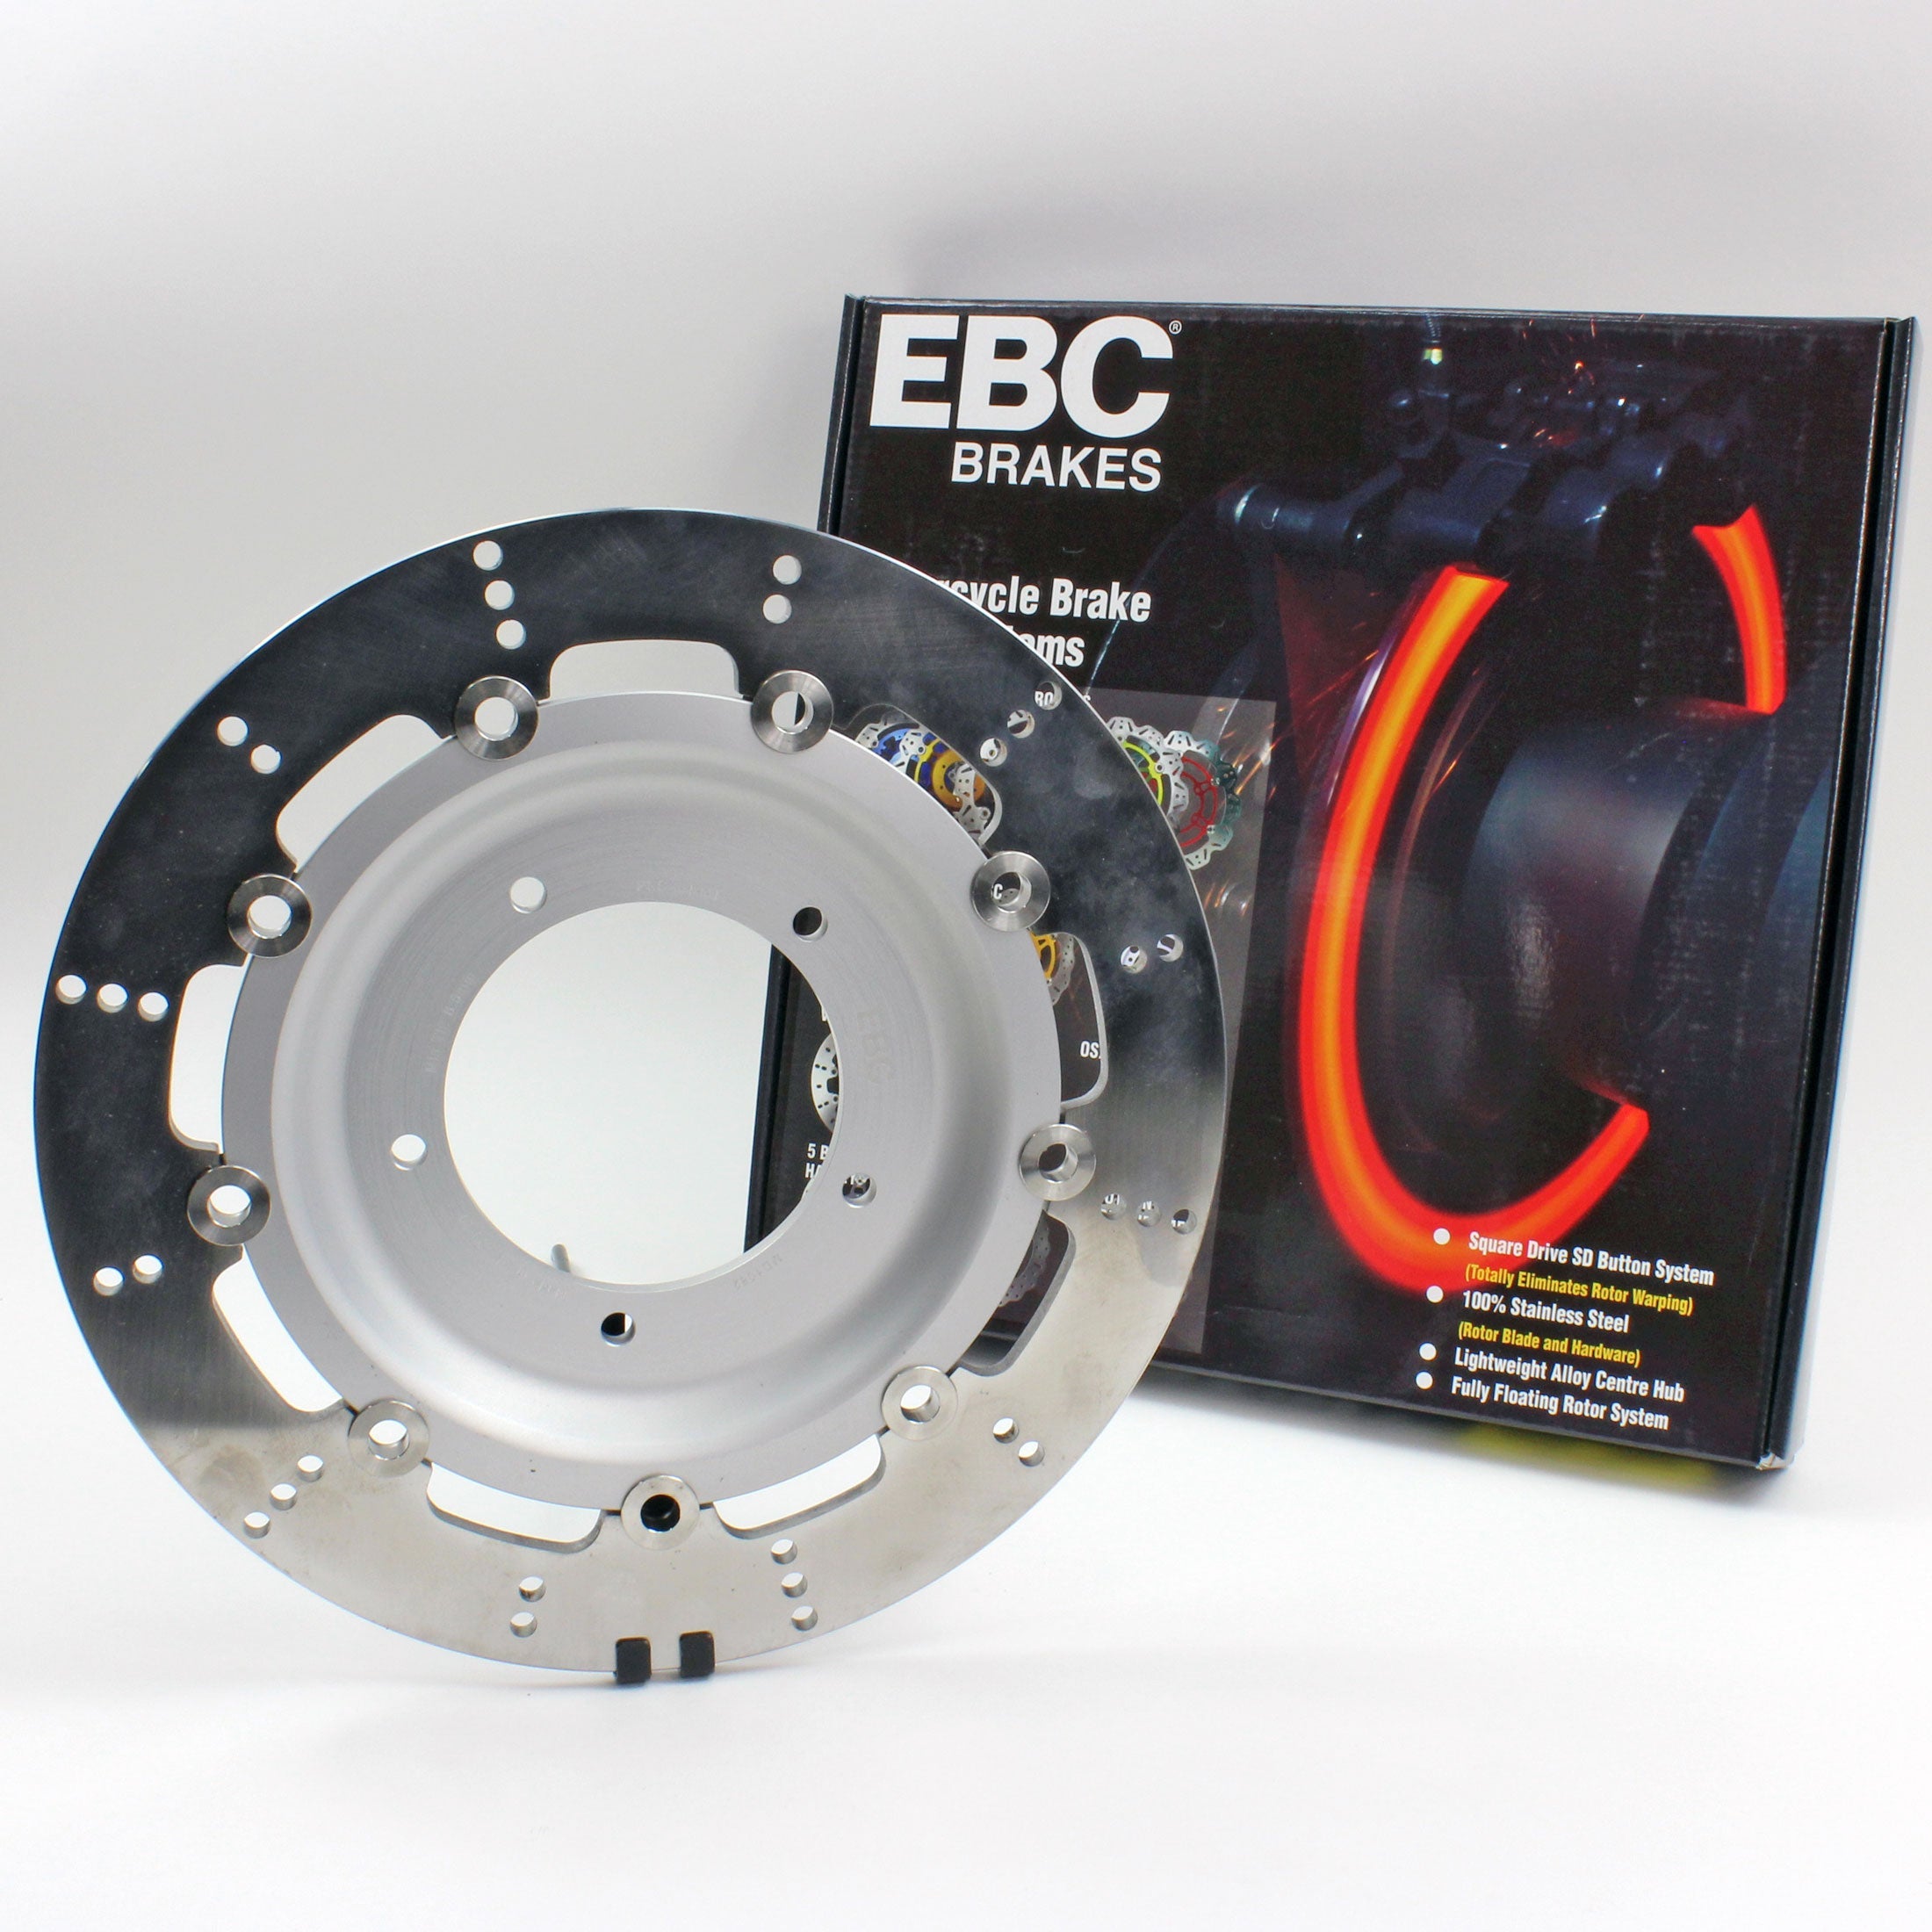 EBC-Brakes Stainless Steel Disc With Contoured Profile to fit Rear